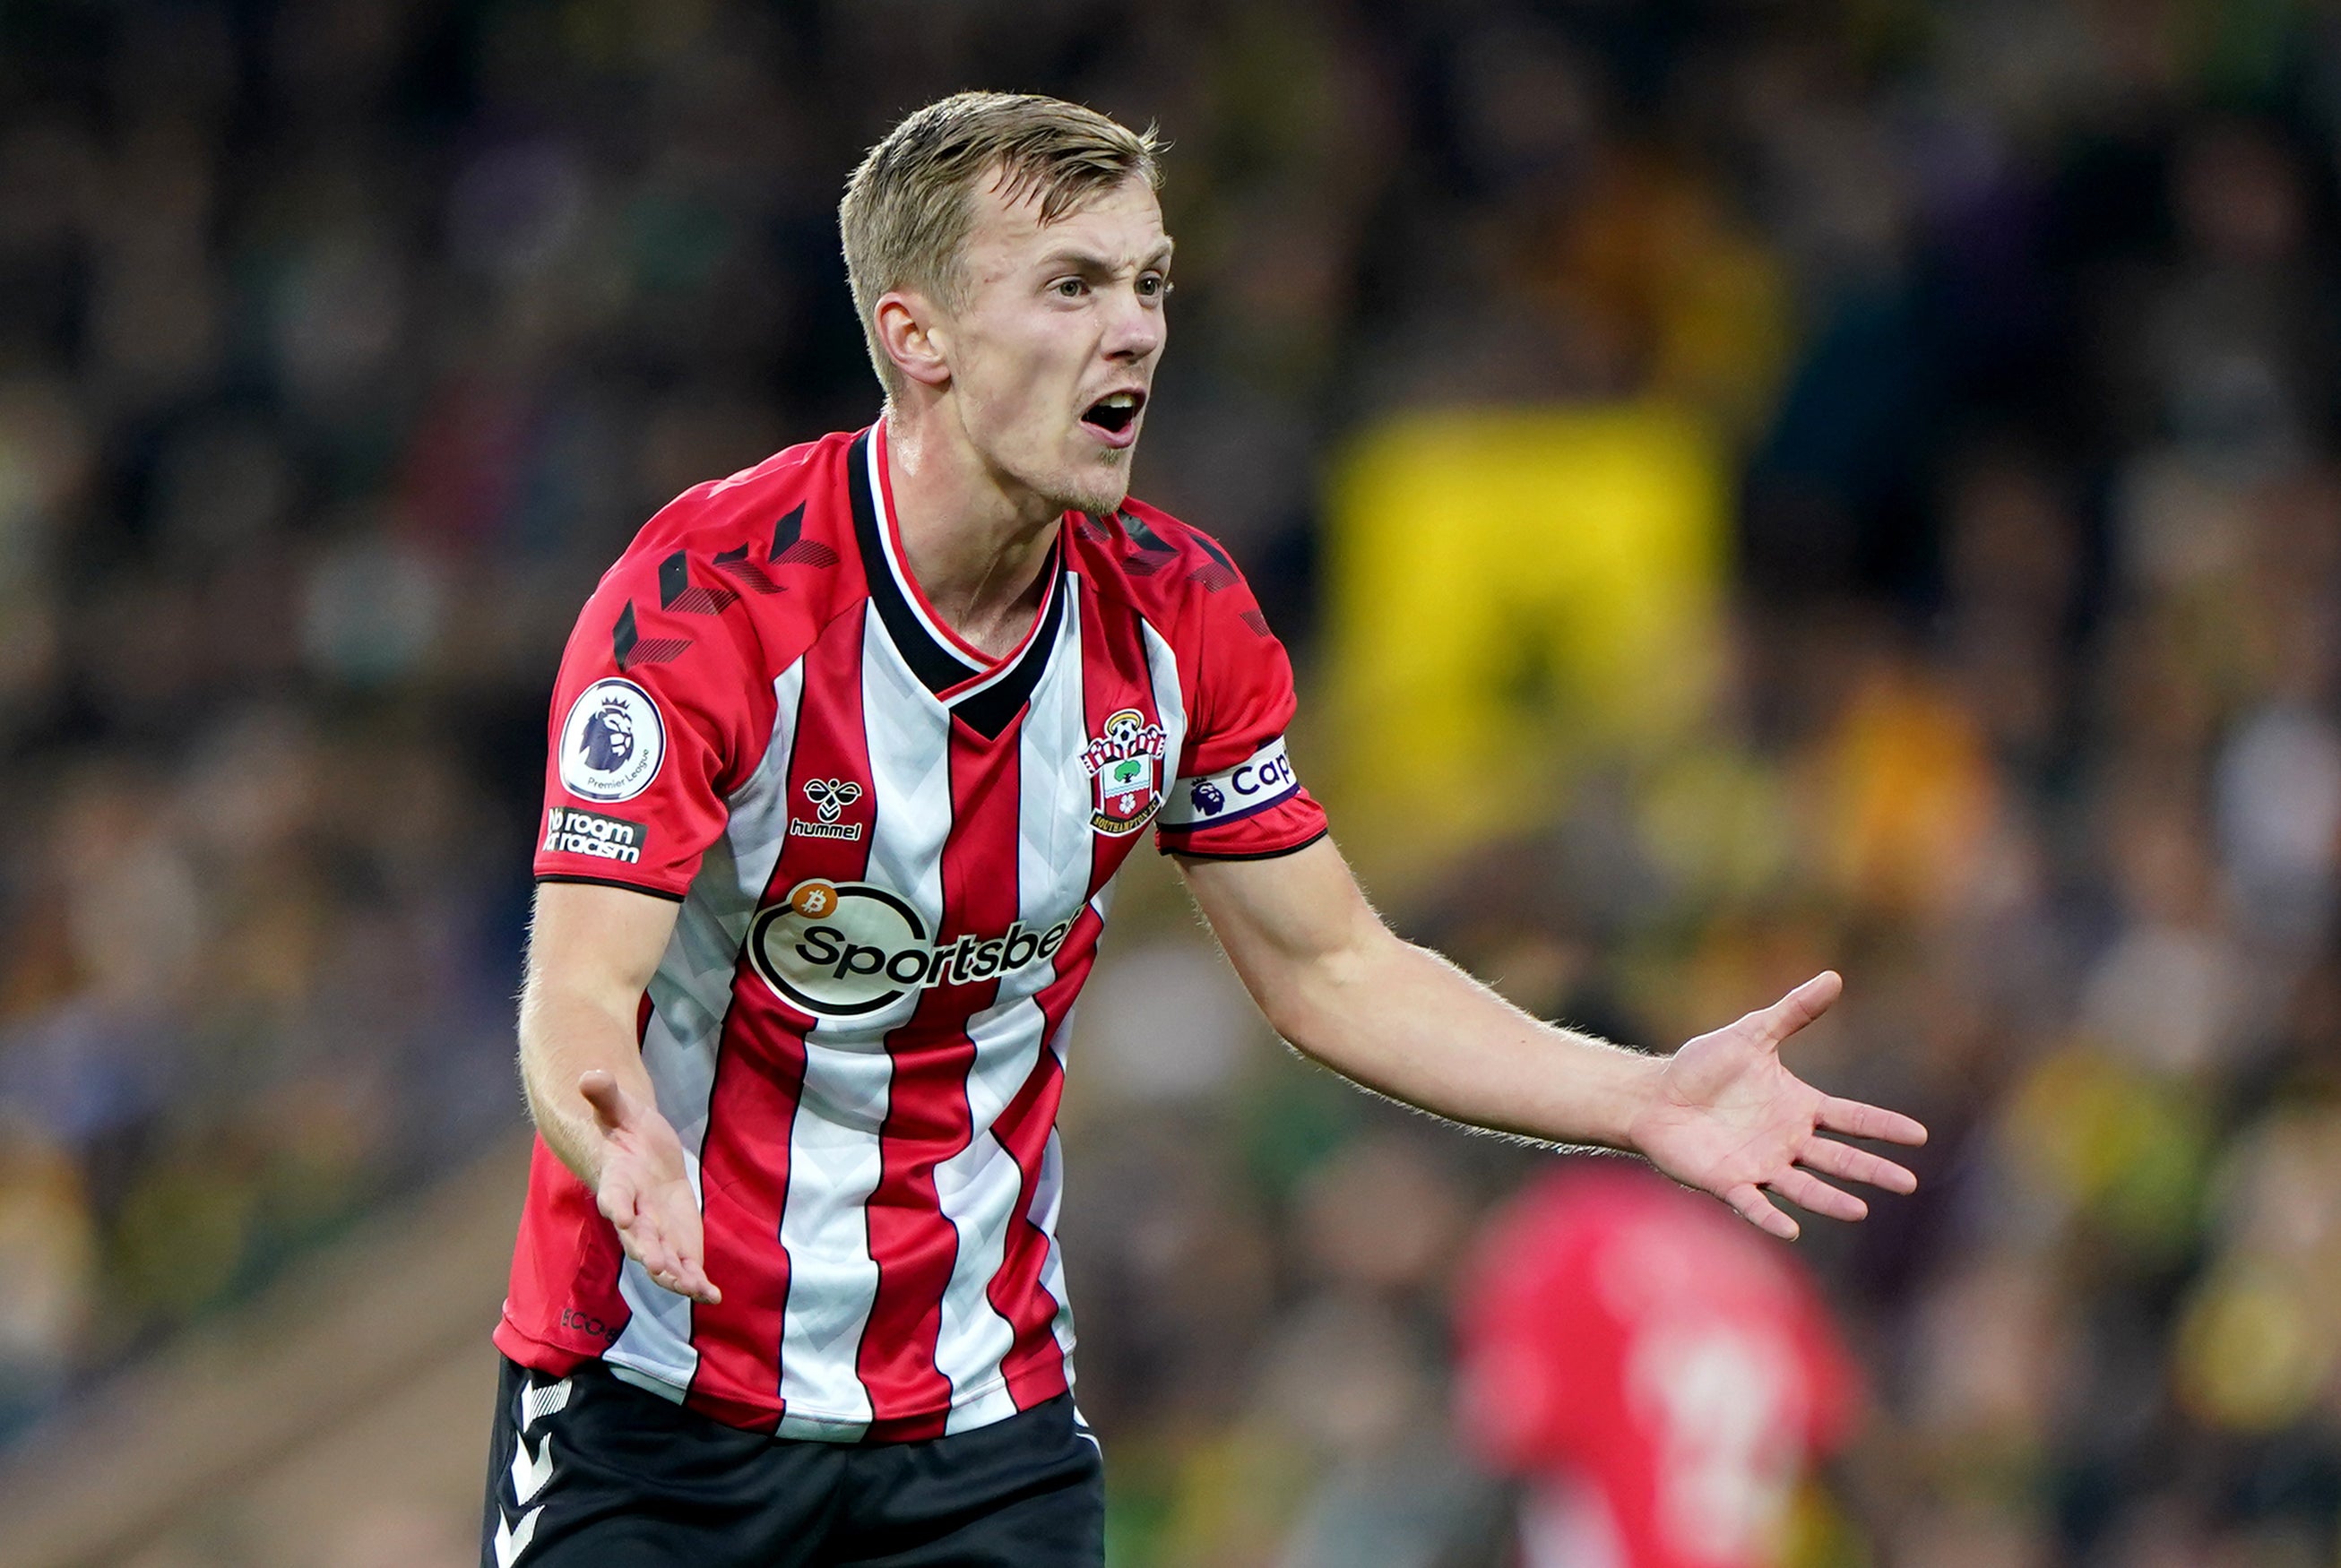 James Ward-Prowse sights set on World Cup spot after Euro 2020 disappointment - The Independent